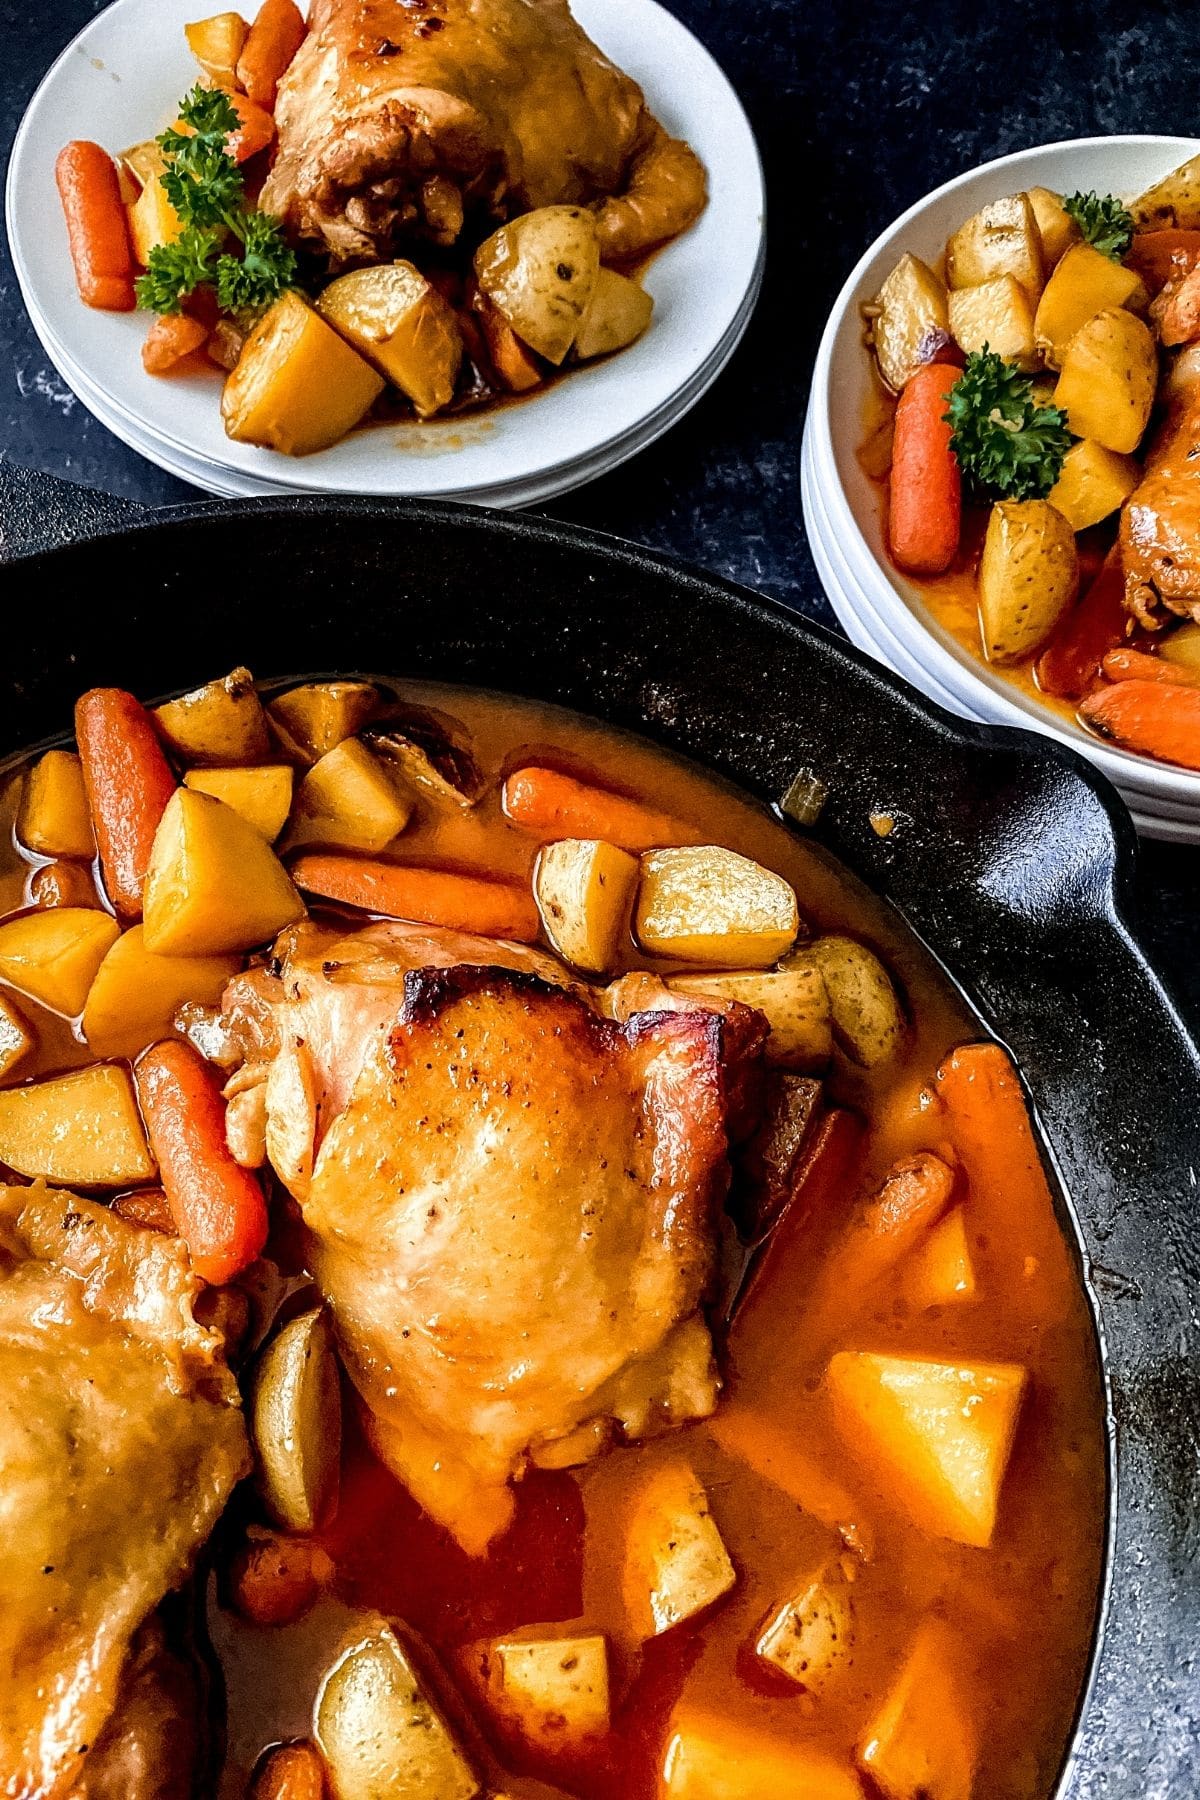 Skillet of chicken with vegetables in front of two white plates with same